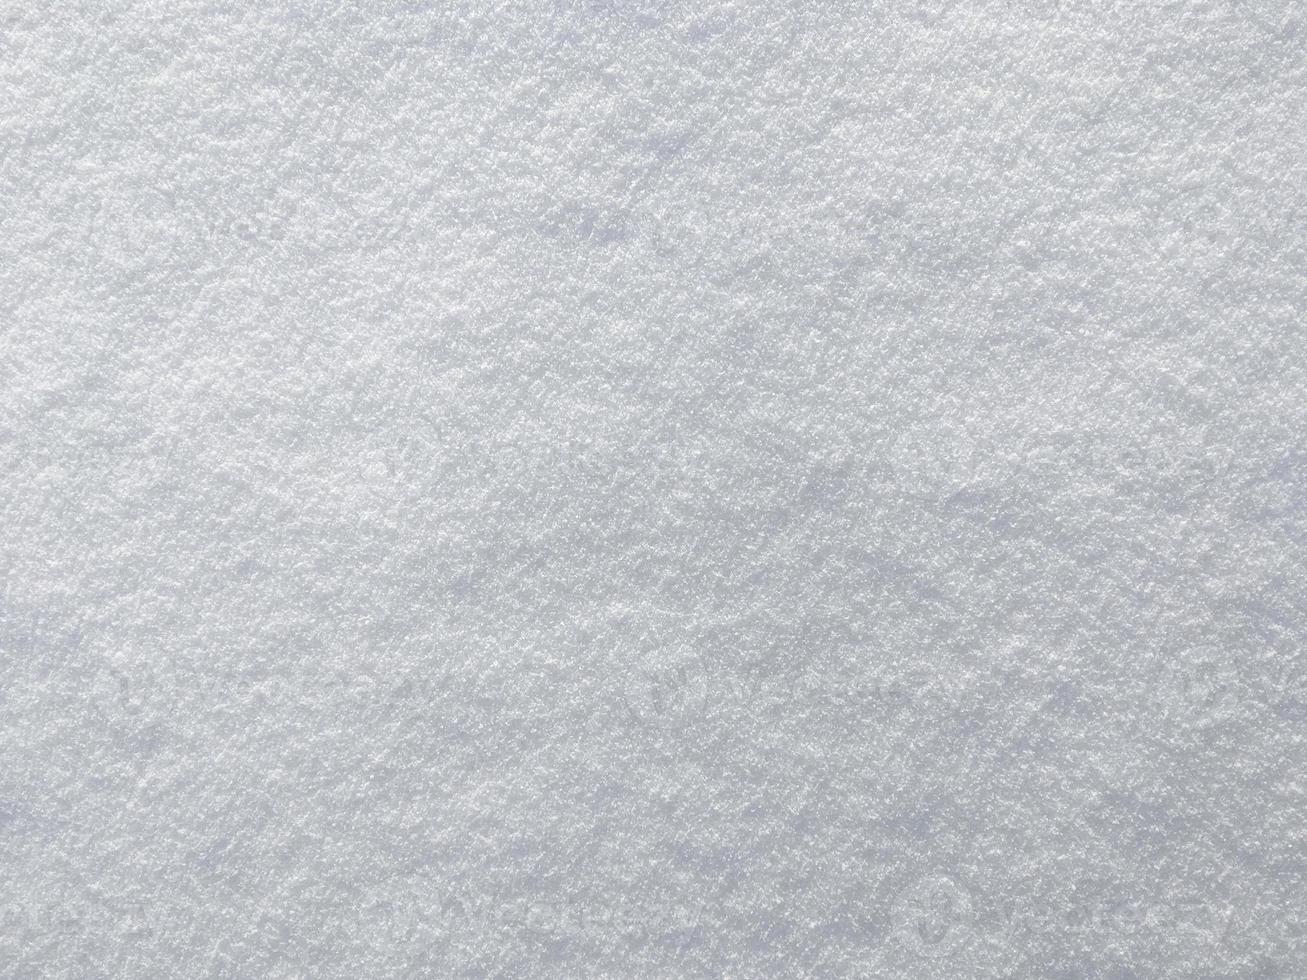 Snow texture. Place for text. Your text here photo